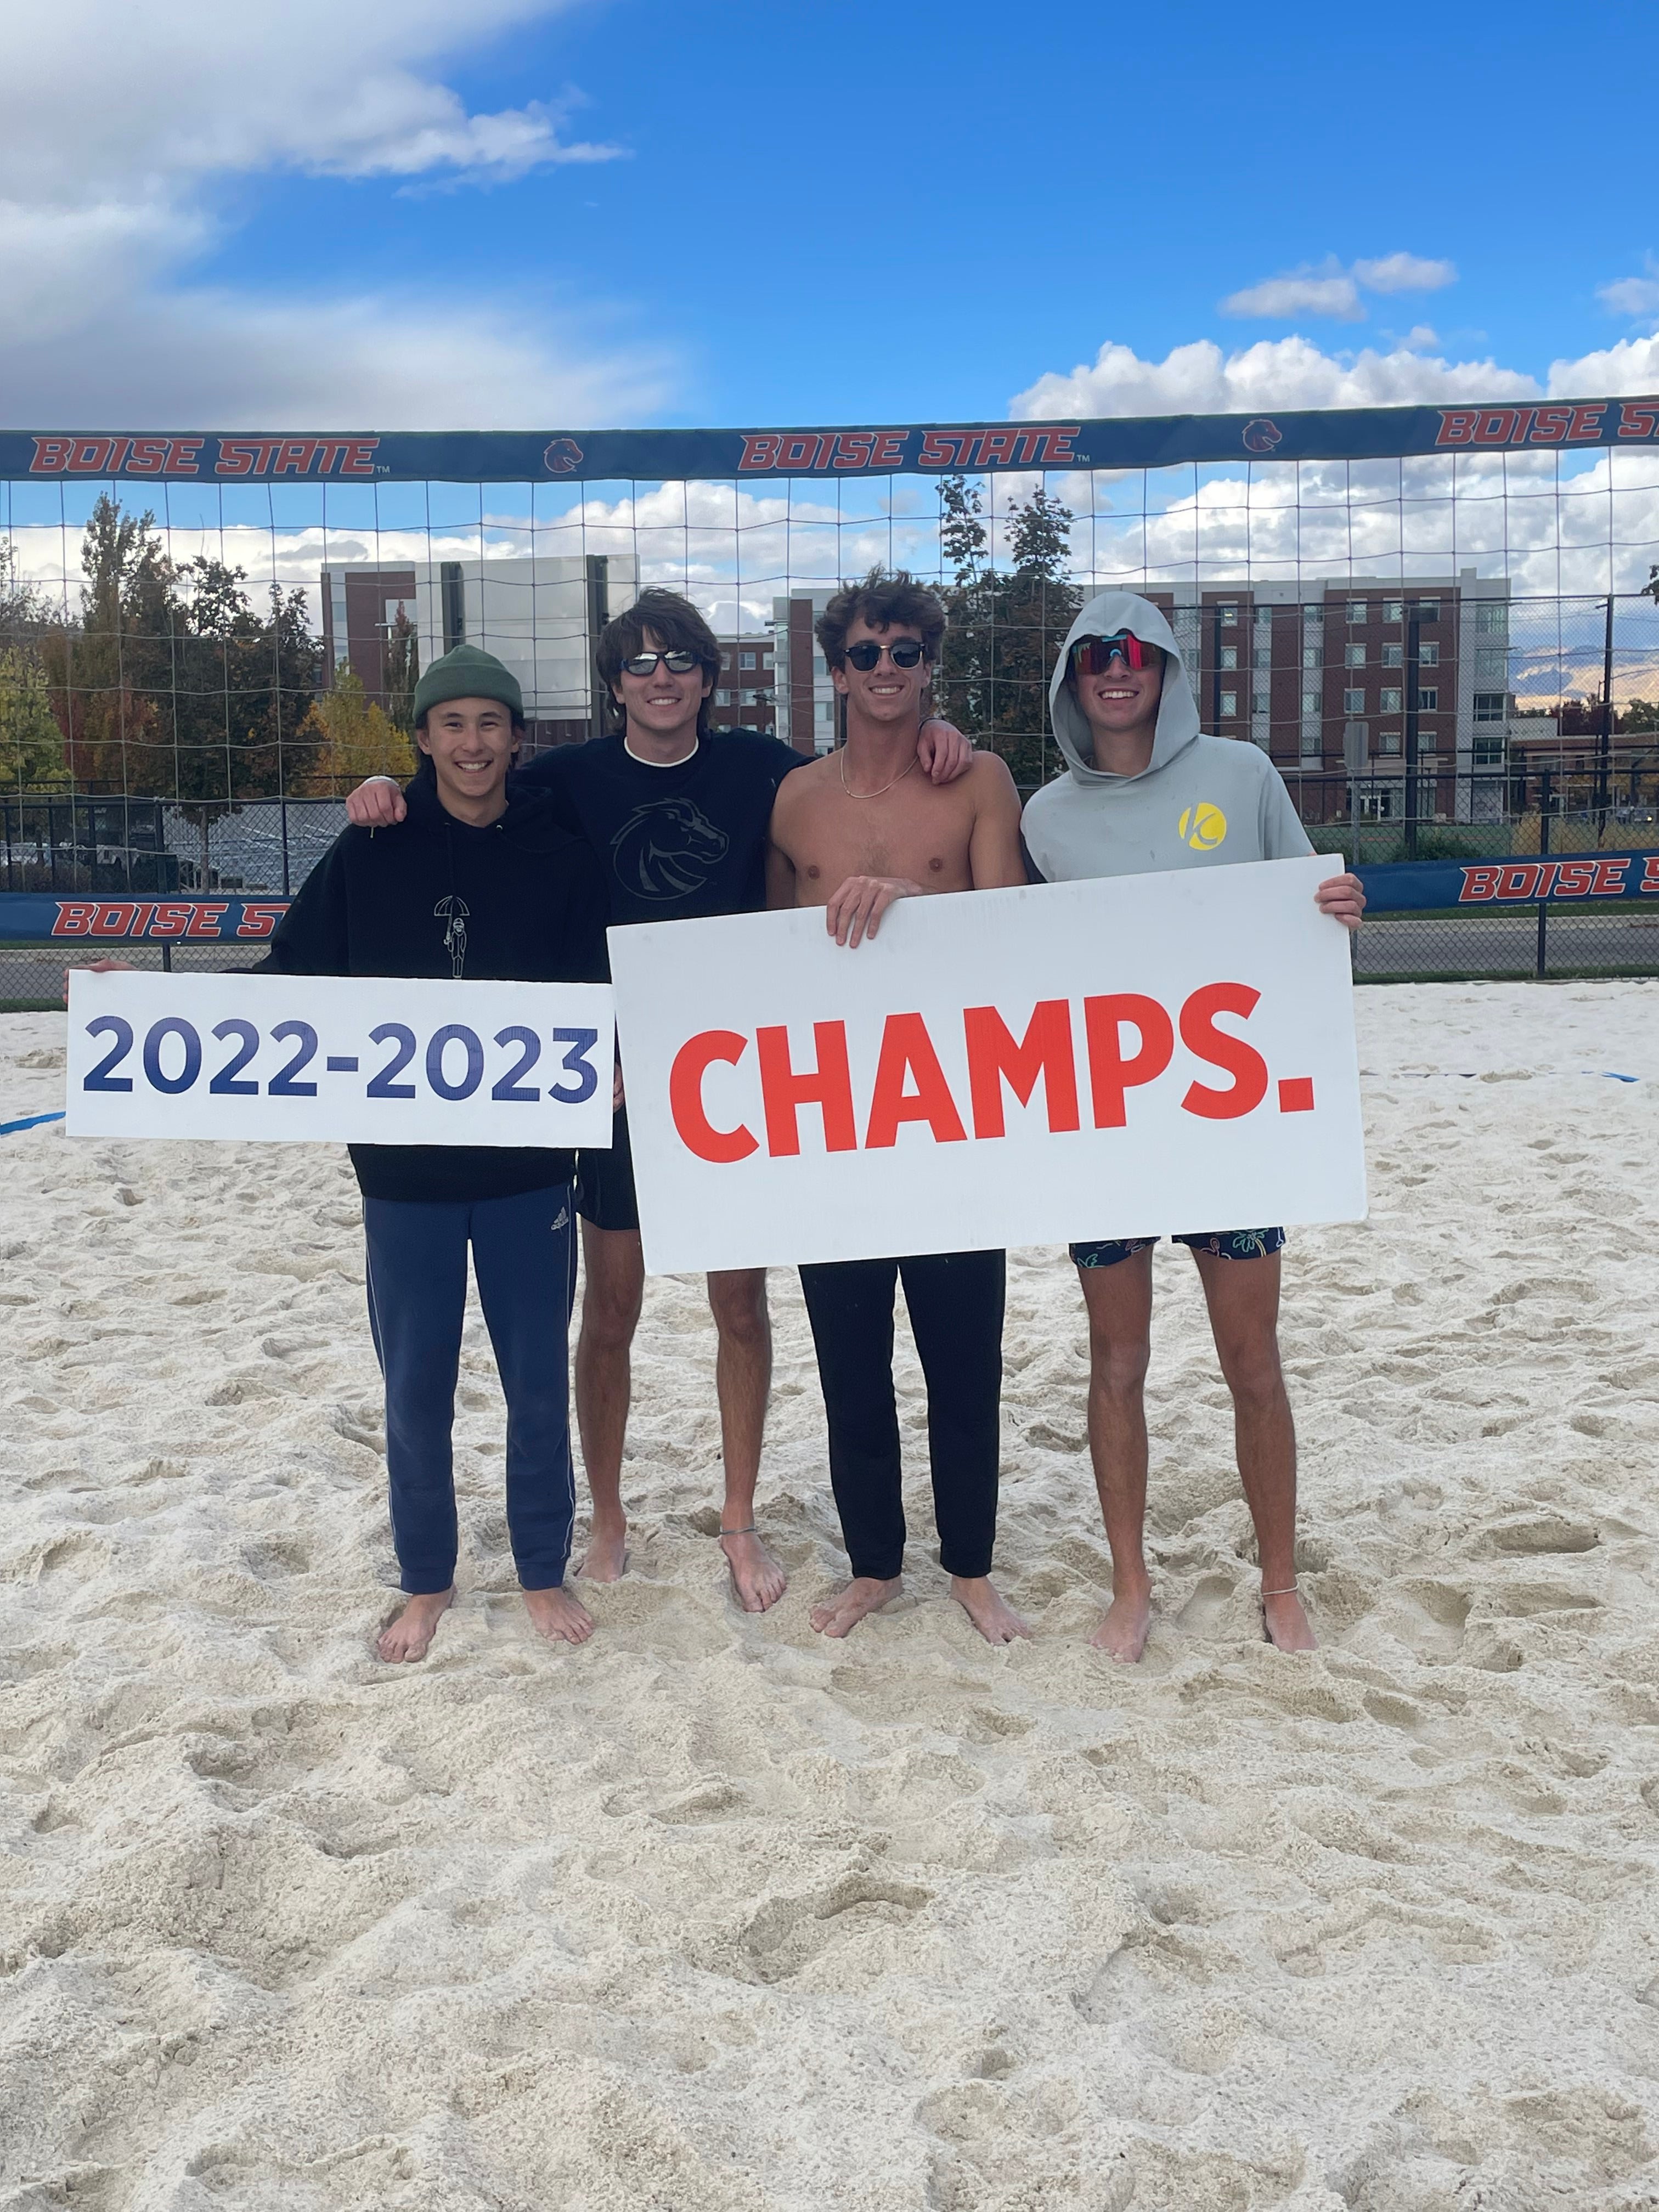 Fall 2022, 4v4 Sand Volleyball, Men's, Justice is Served